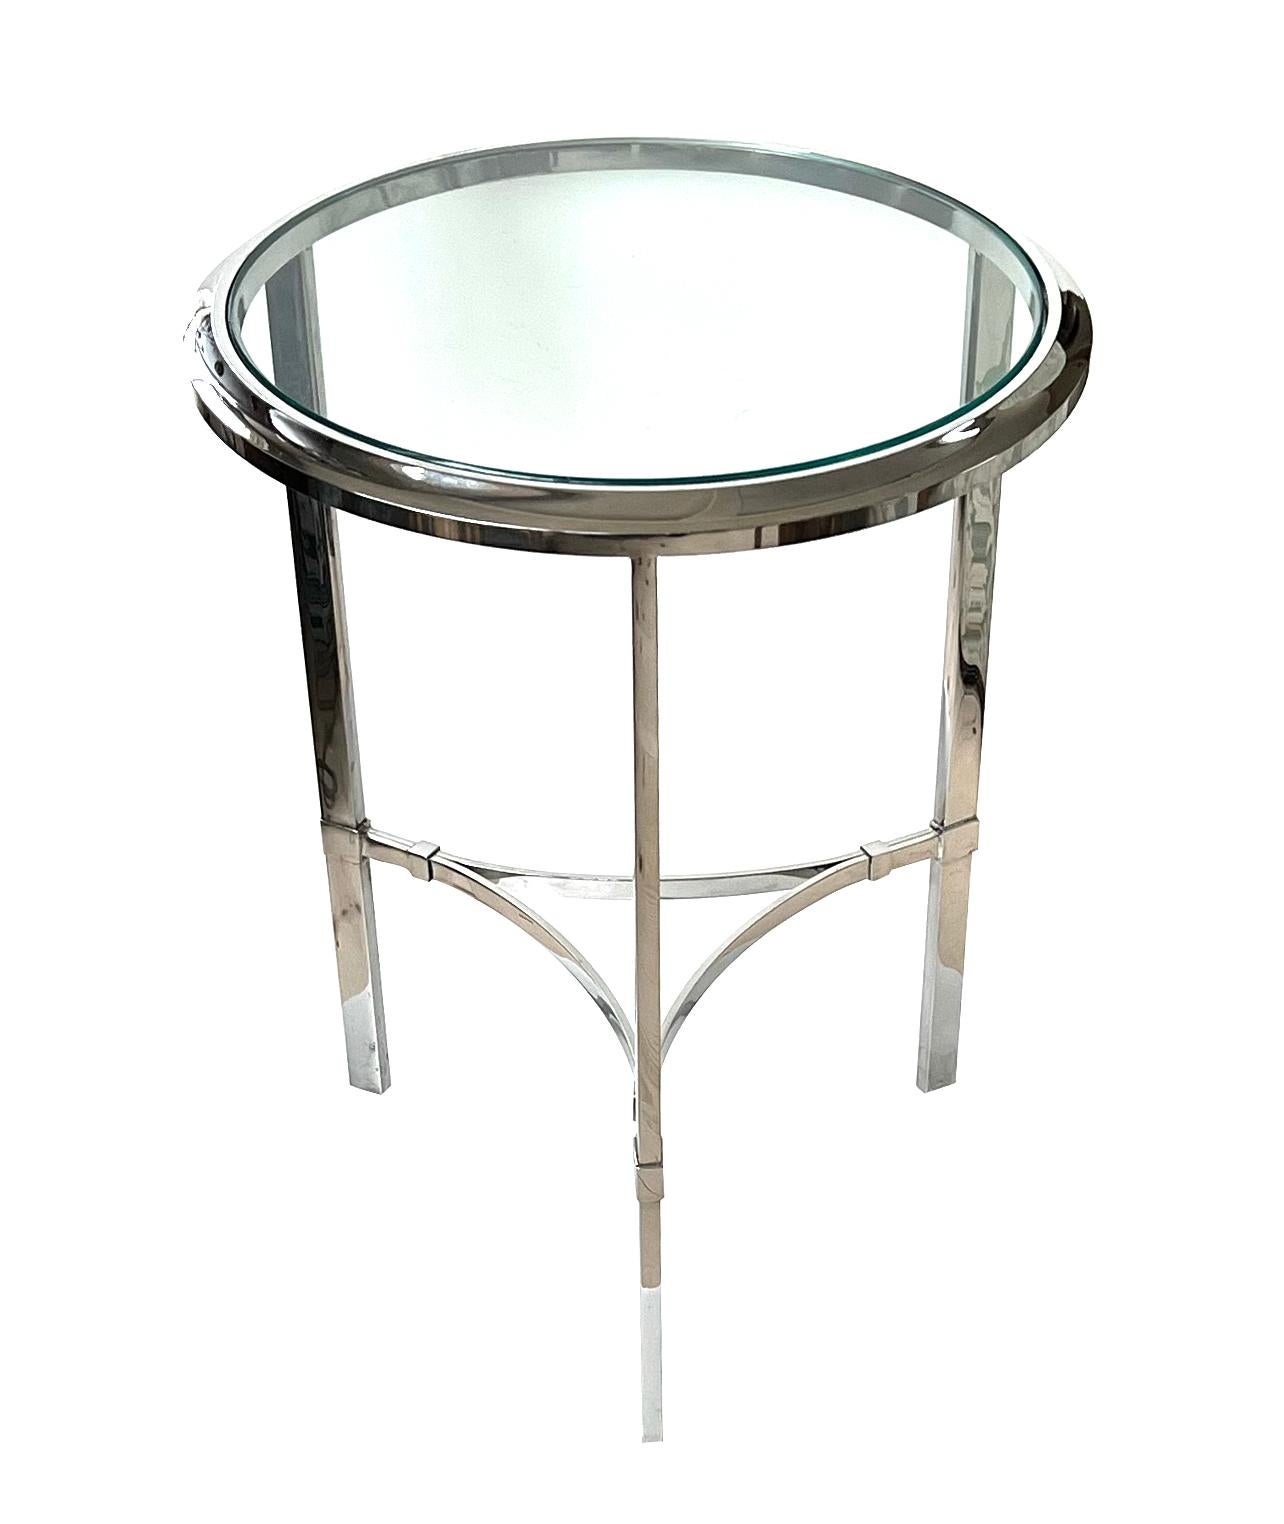 of solid heavy construction with round glass inset top within a thick coved molded frame; all raised on three rectilinear supports joined by concave stretchers